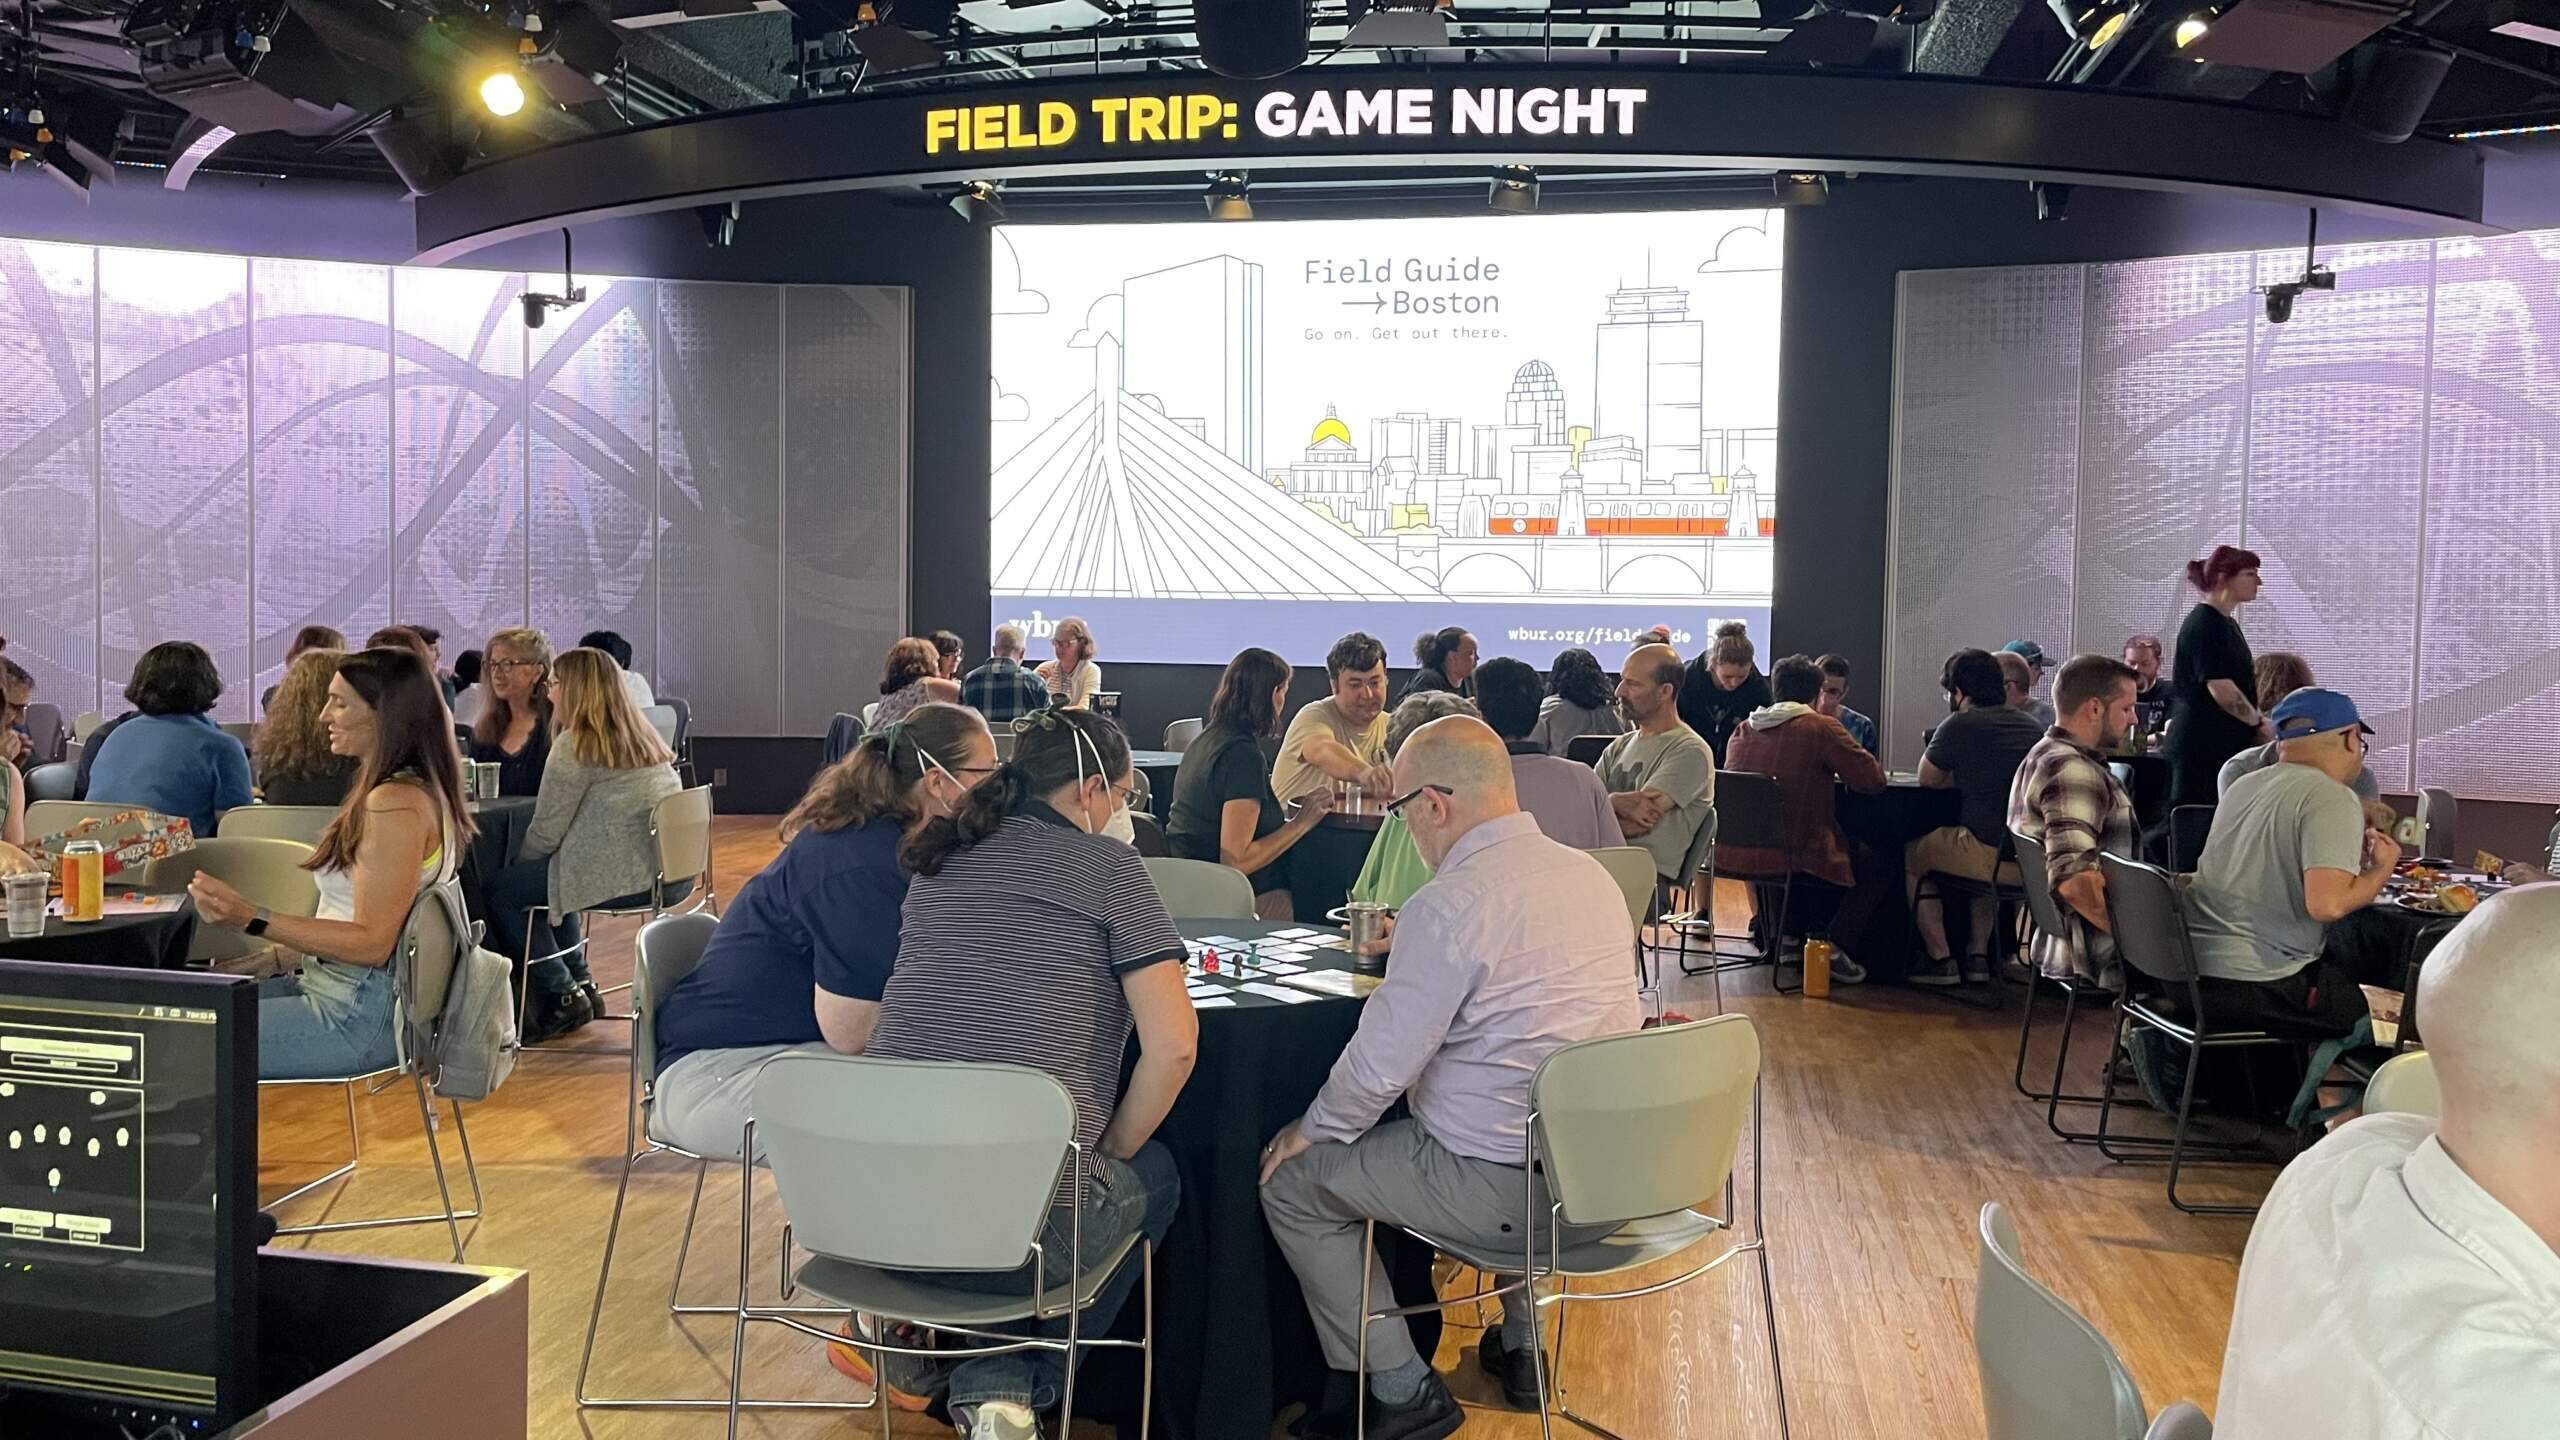 CitySpace guests worked to defeat fellow board game players at Field Trip: Game Night. (Candice Springer/WBUR)